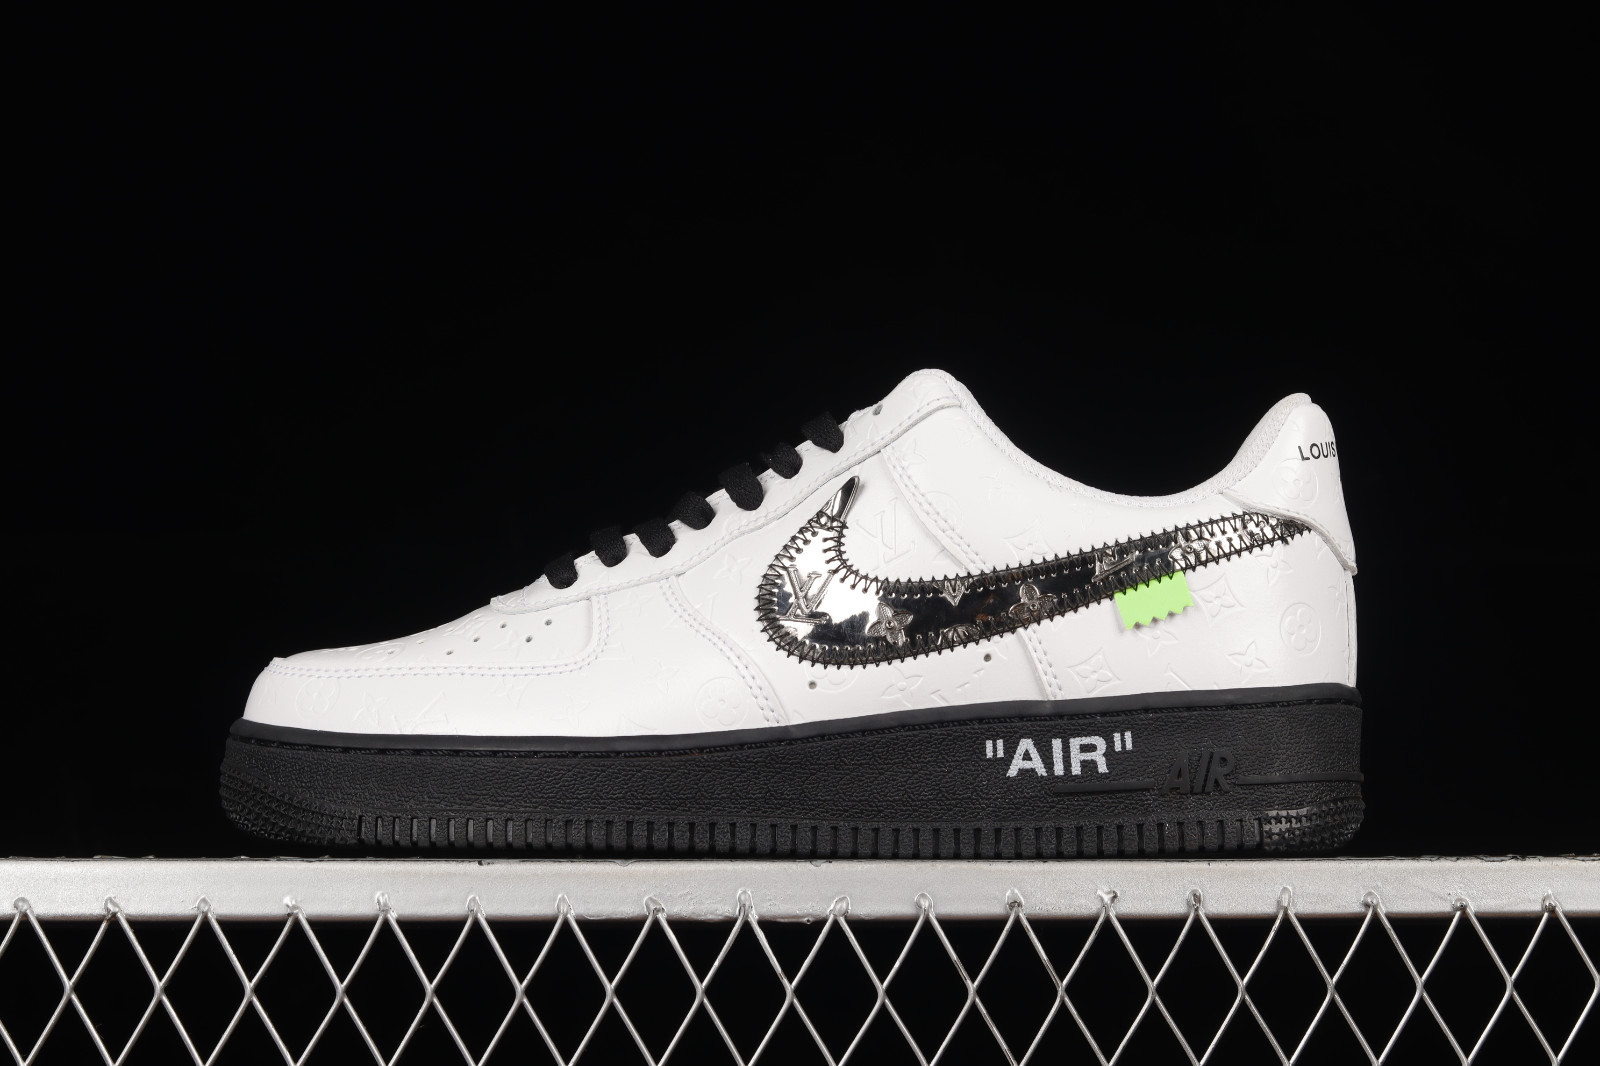 styling Appears nike air force 1 suede - LV x Appears Nike Air Force 1 07  Low White Black Silver IA9V9A - GmarShops